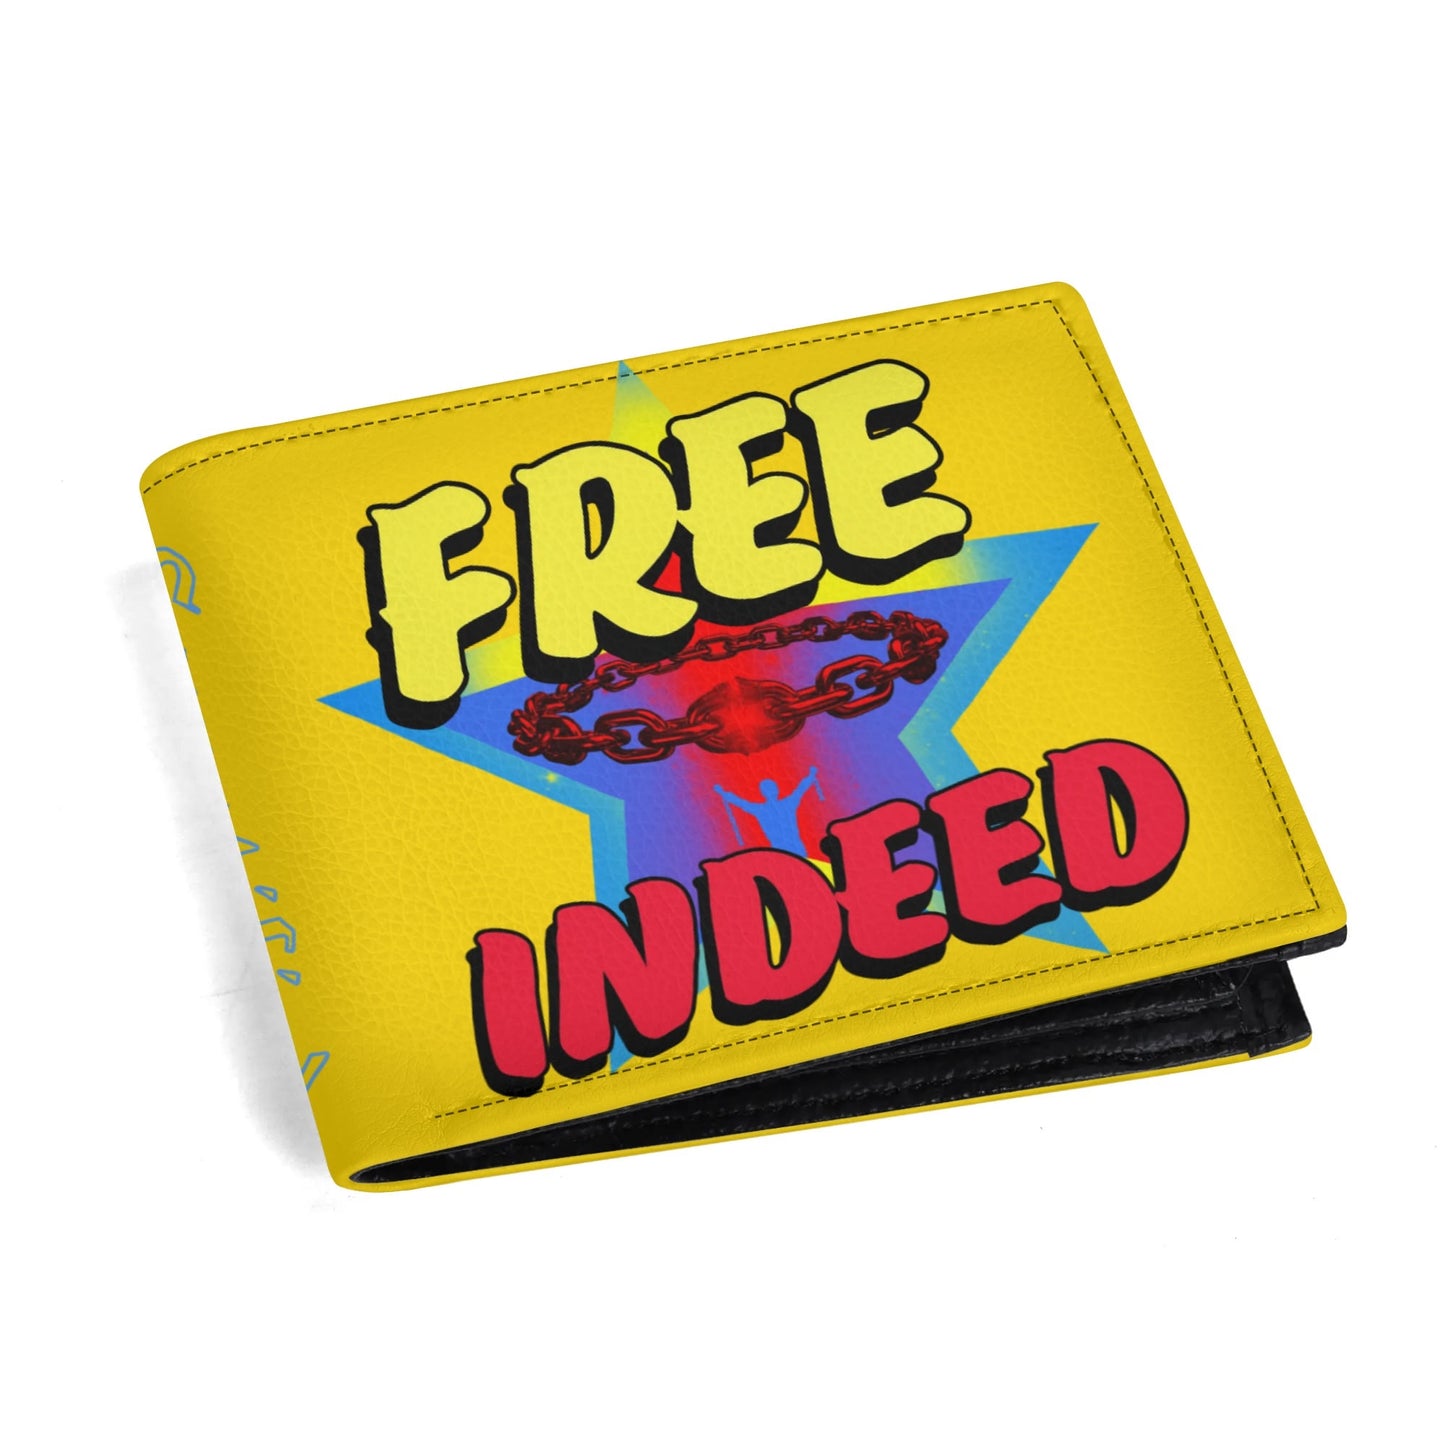 FREE INDEED-  PU Leather Wallet Paper Folded Wallet, FREE SHIPPING